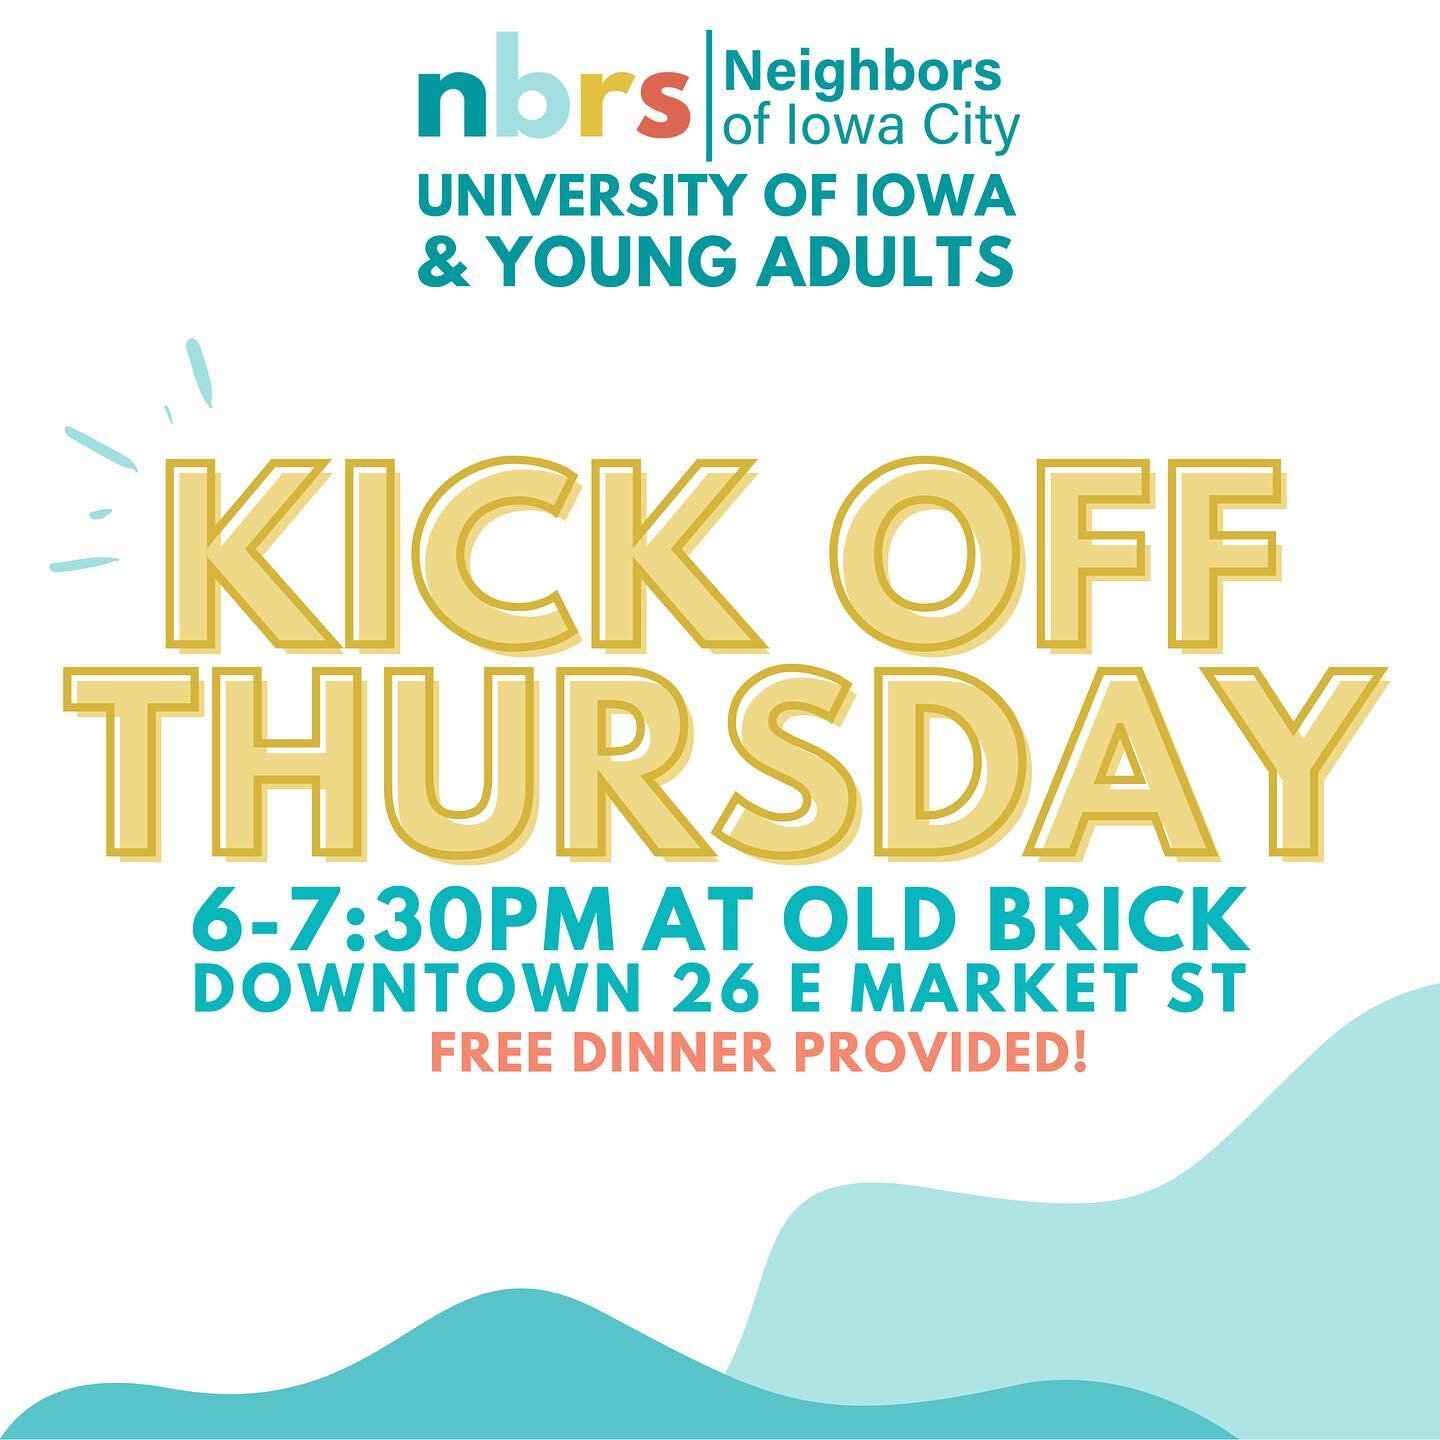 NEIGHBORS COLLEGE TONIGHT 🙌🎉✨ free dinner provided!

For all college students and young adults! 6-7:30pm @ Old Brick. 26 E Market St. Free parking in the lot if you&rsquo;re driving!

Come as you are. 
Find belonging. 
Love your neighbor.

Who are 